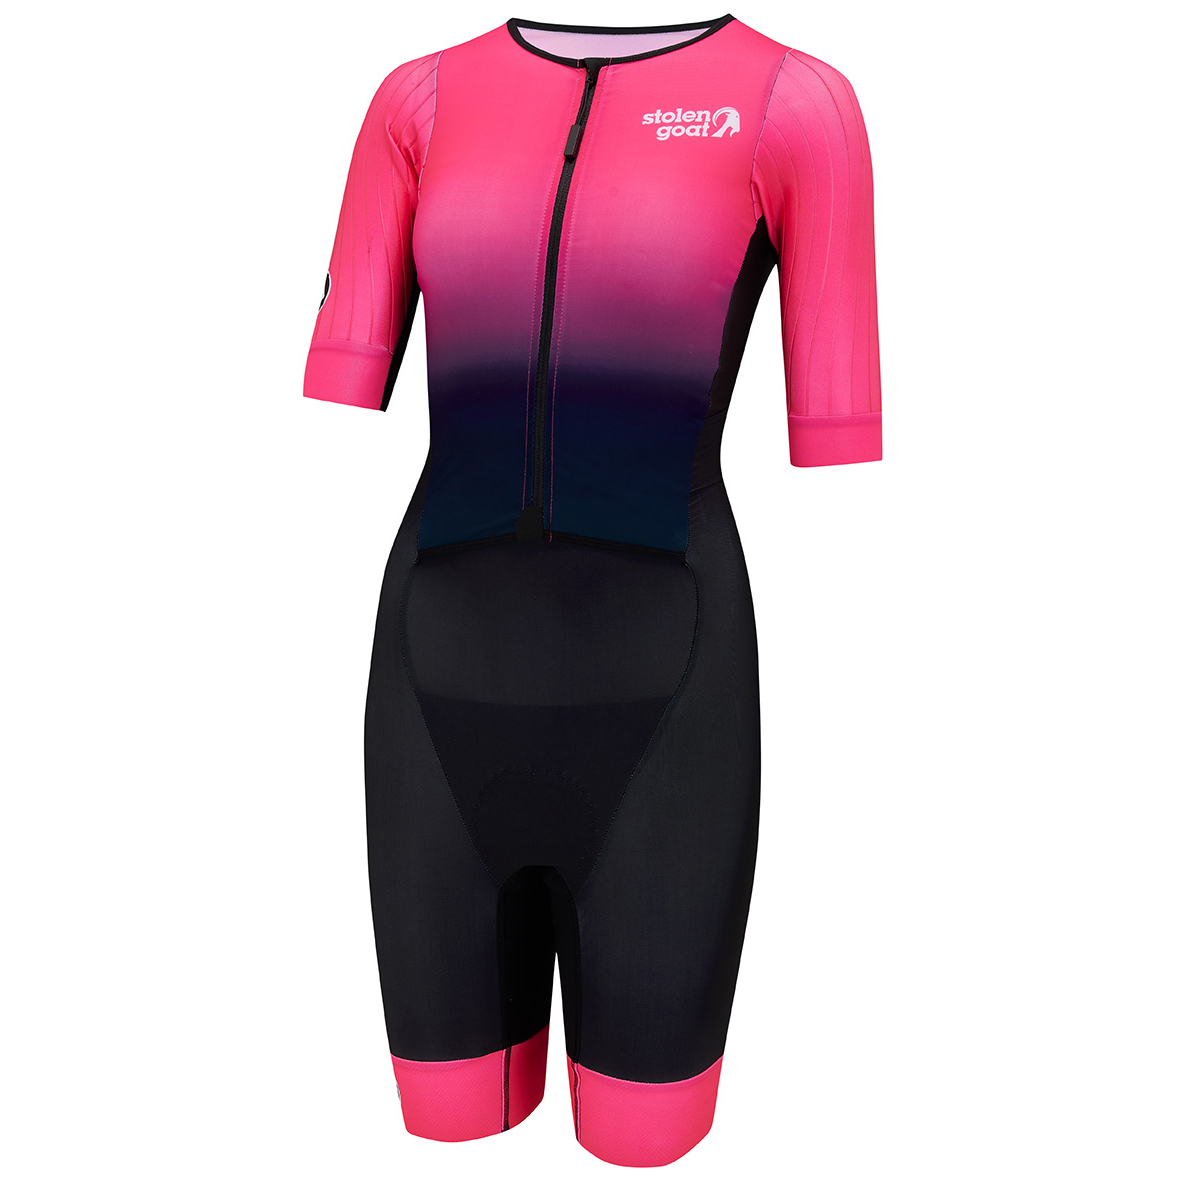 Stolen Goat women's Dodge short sleeved triathlon race suit bright pink to black gradient fade with bright pink leg grippers